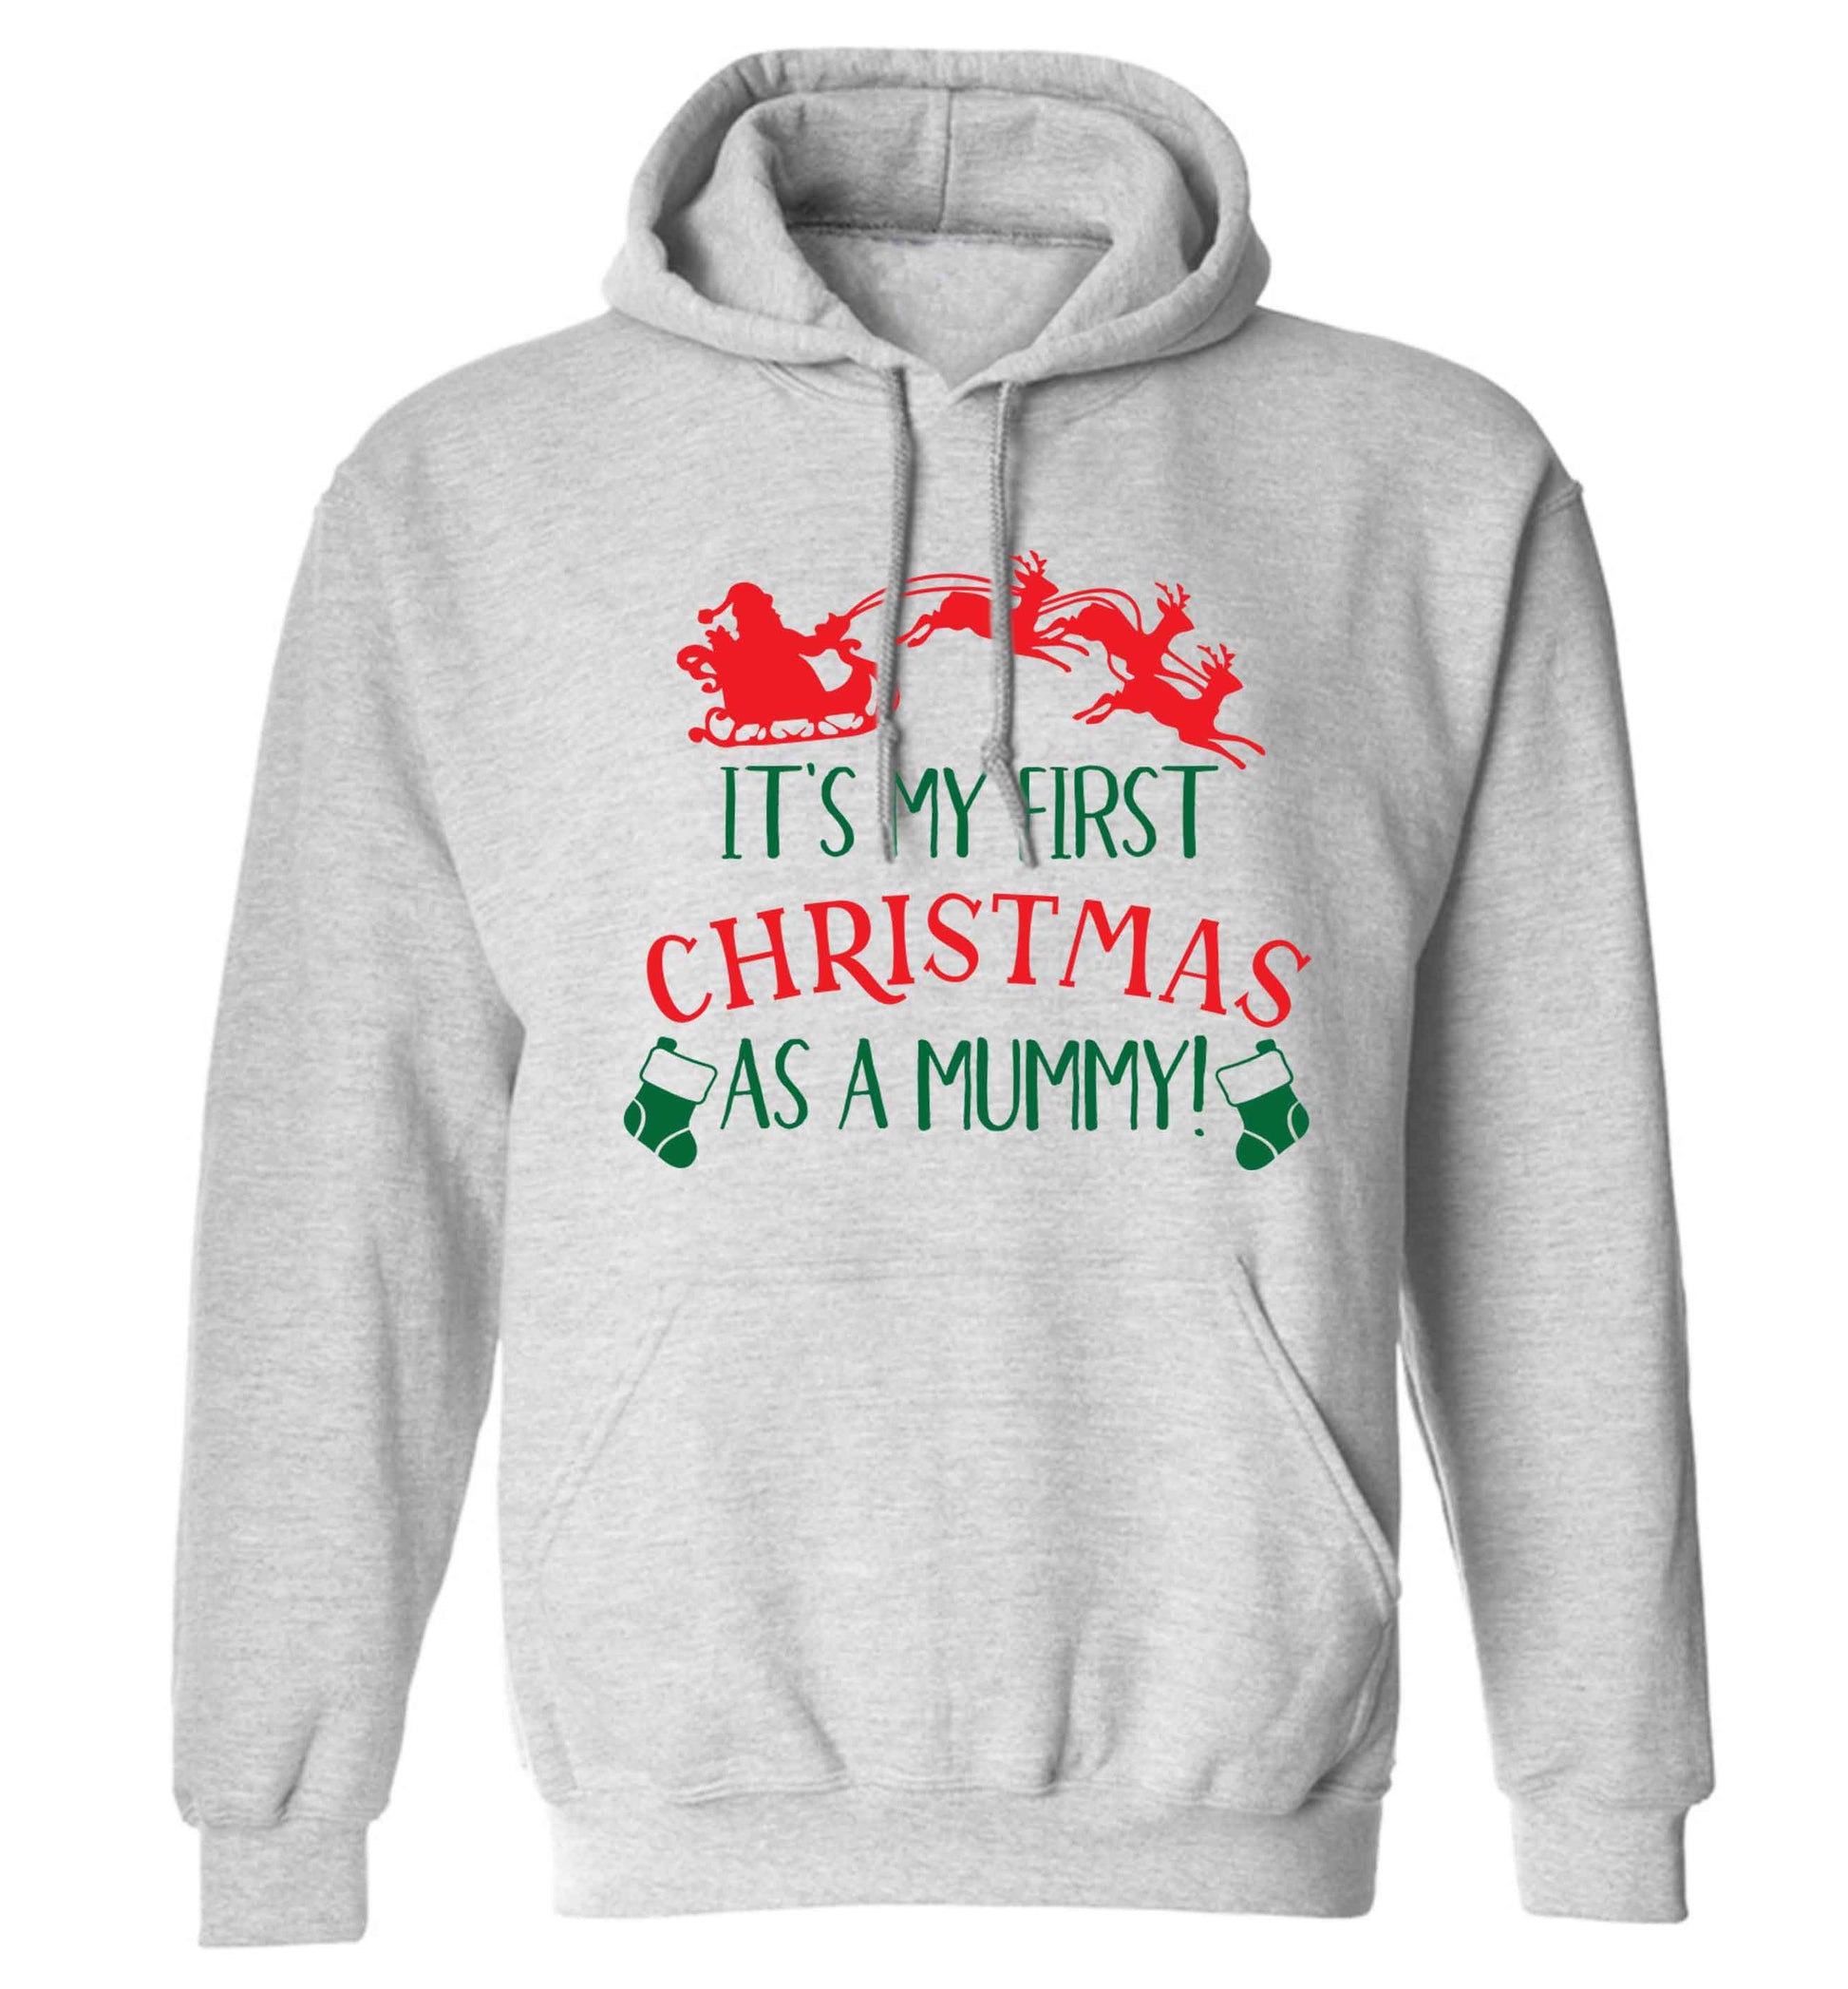 It's my first Christmas as a mummy adults unisex grey hoodie 2XL